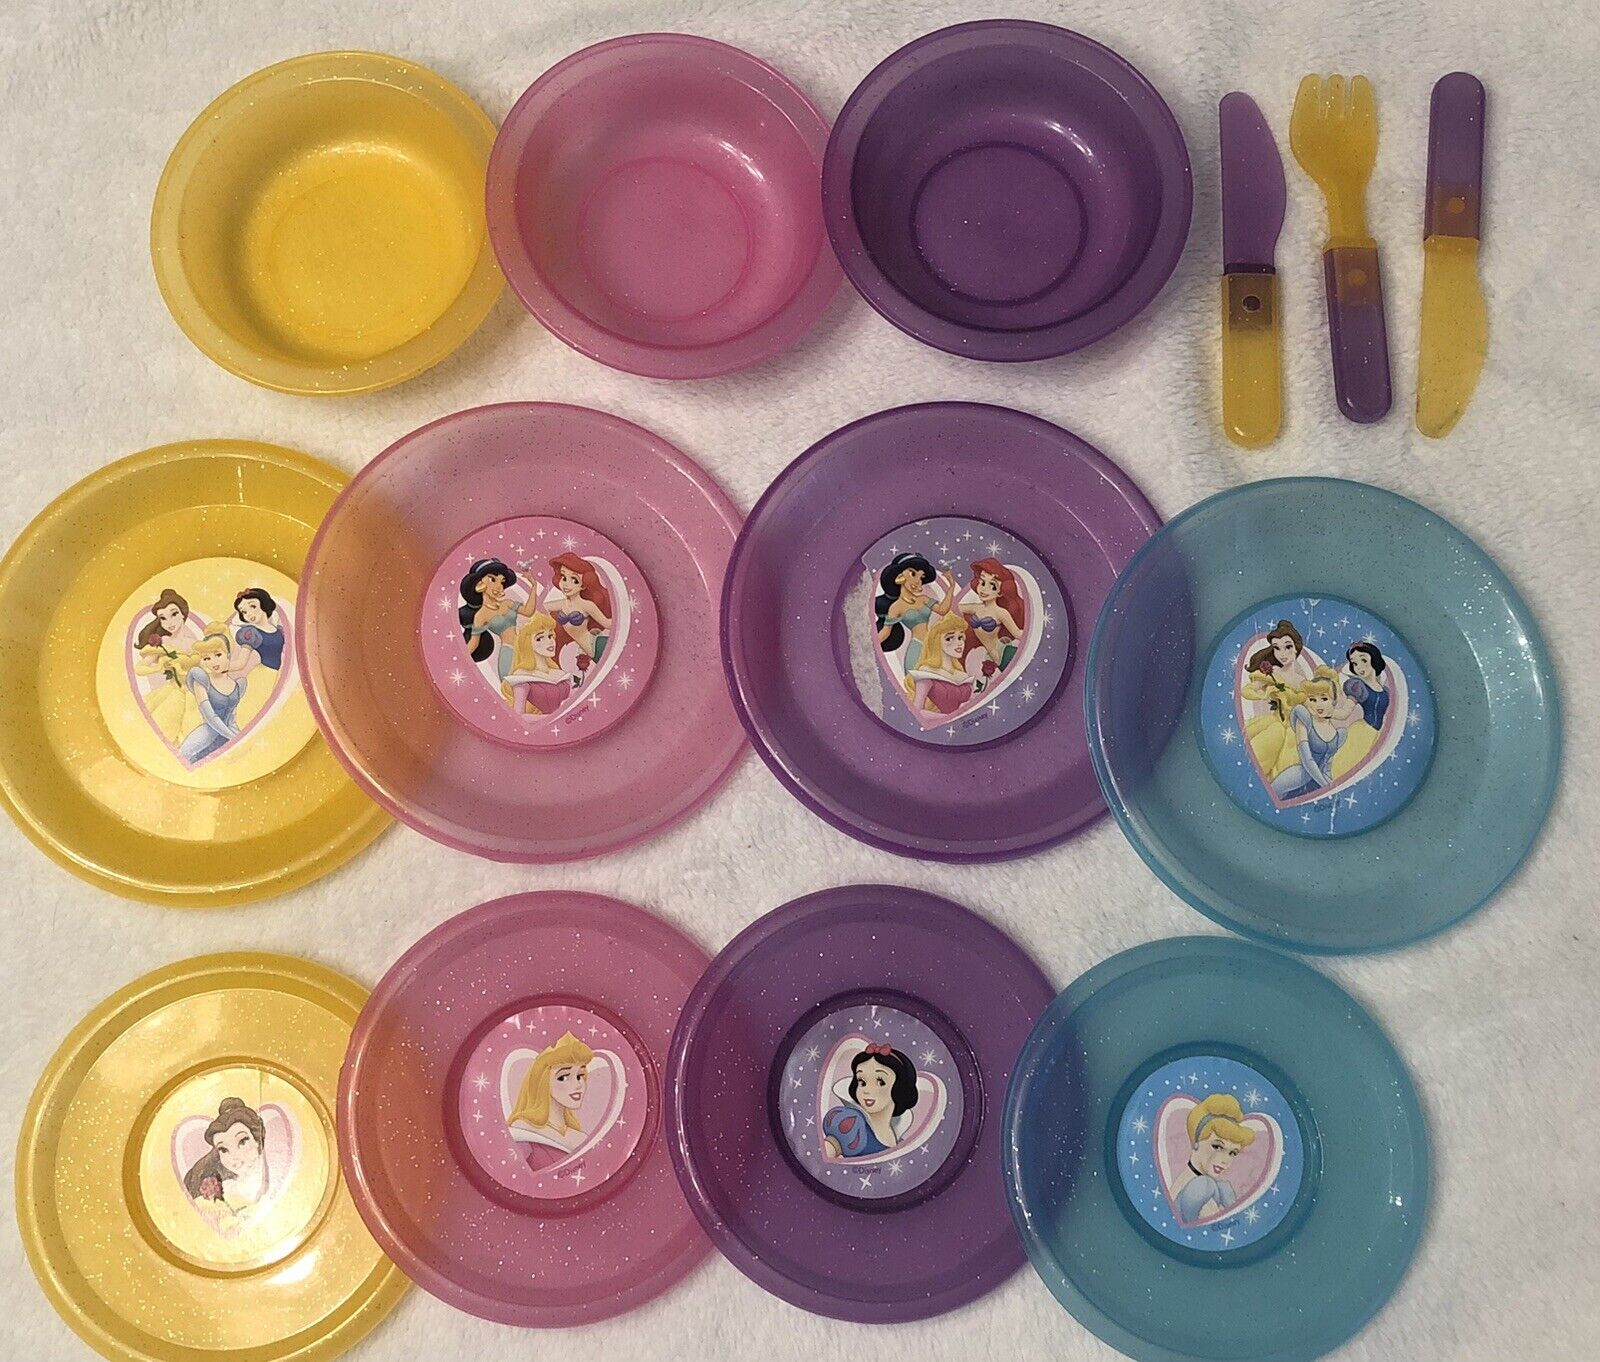 Disney Princess Glitter Toy Play Dishes LOT of 12 (Plates Bowls) early 2000s